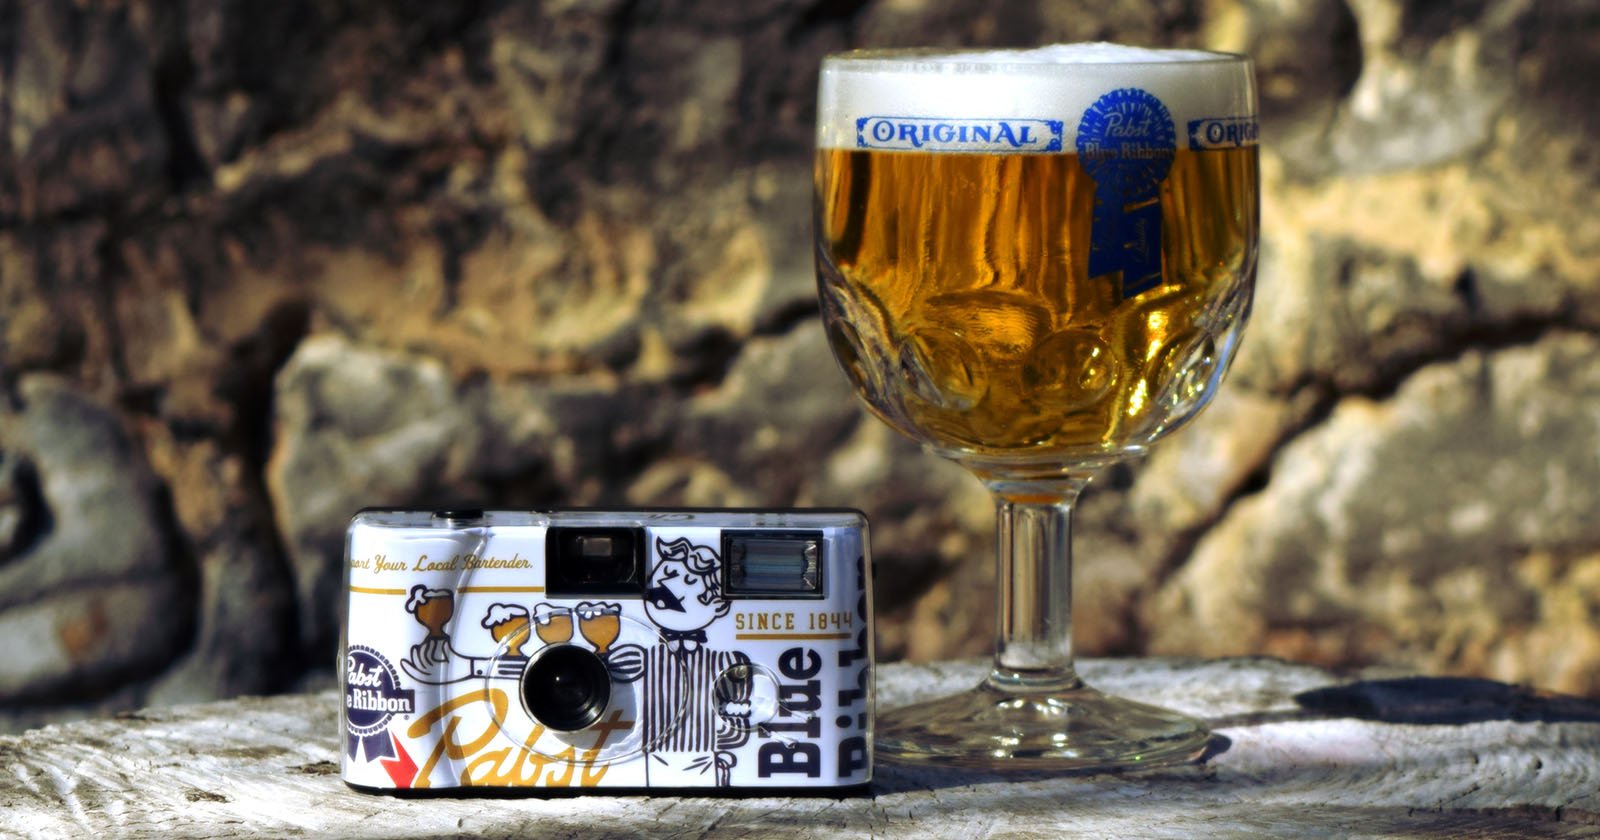 A vintage camera with a Pabst Blue Ribbon design is placed on a surface beside a glass of golden beer with a foamy head. The beer glass is labeled Original. The background features a stone wall with sunlight casting warm tones on the scene.